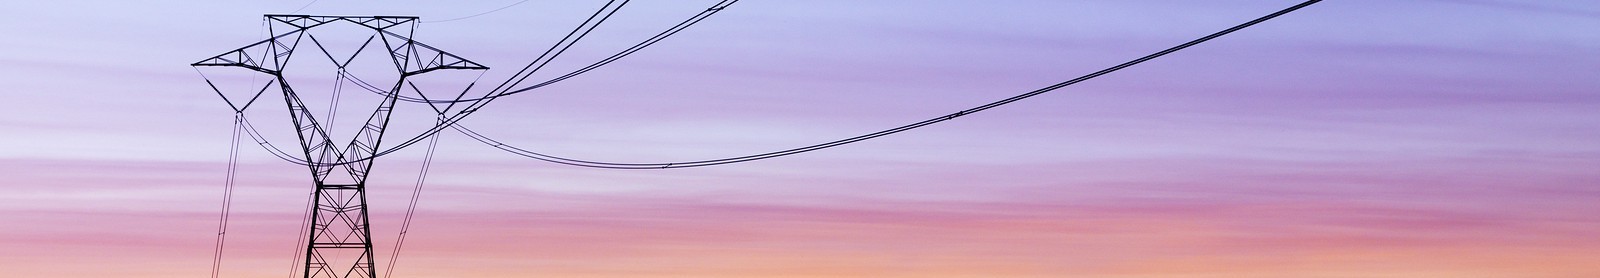 Power lines and tower at sunrise with purple sky